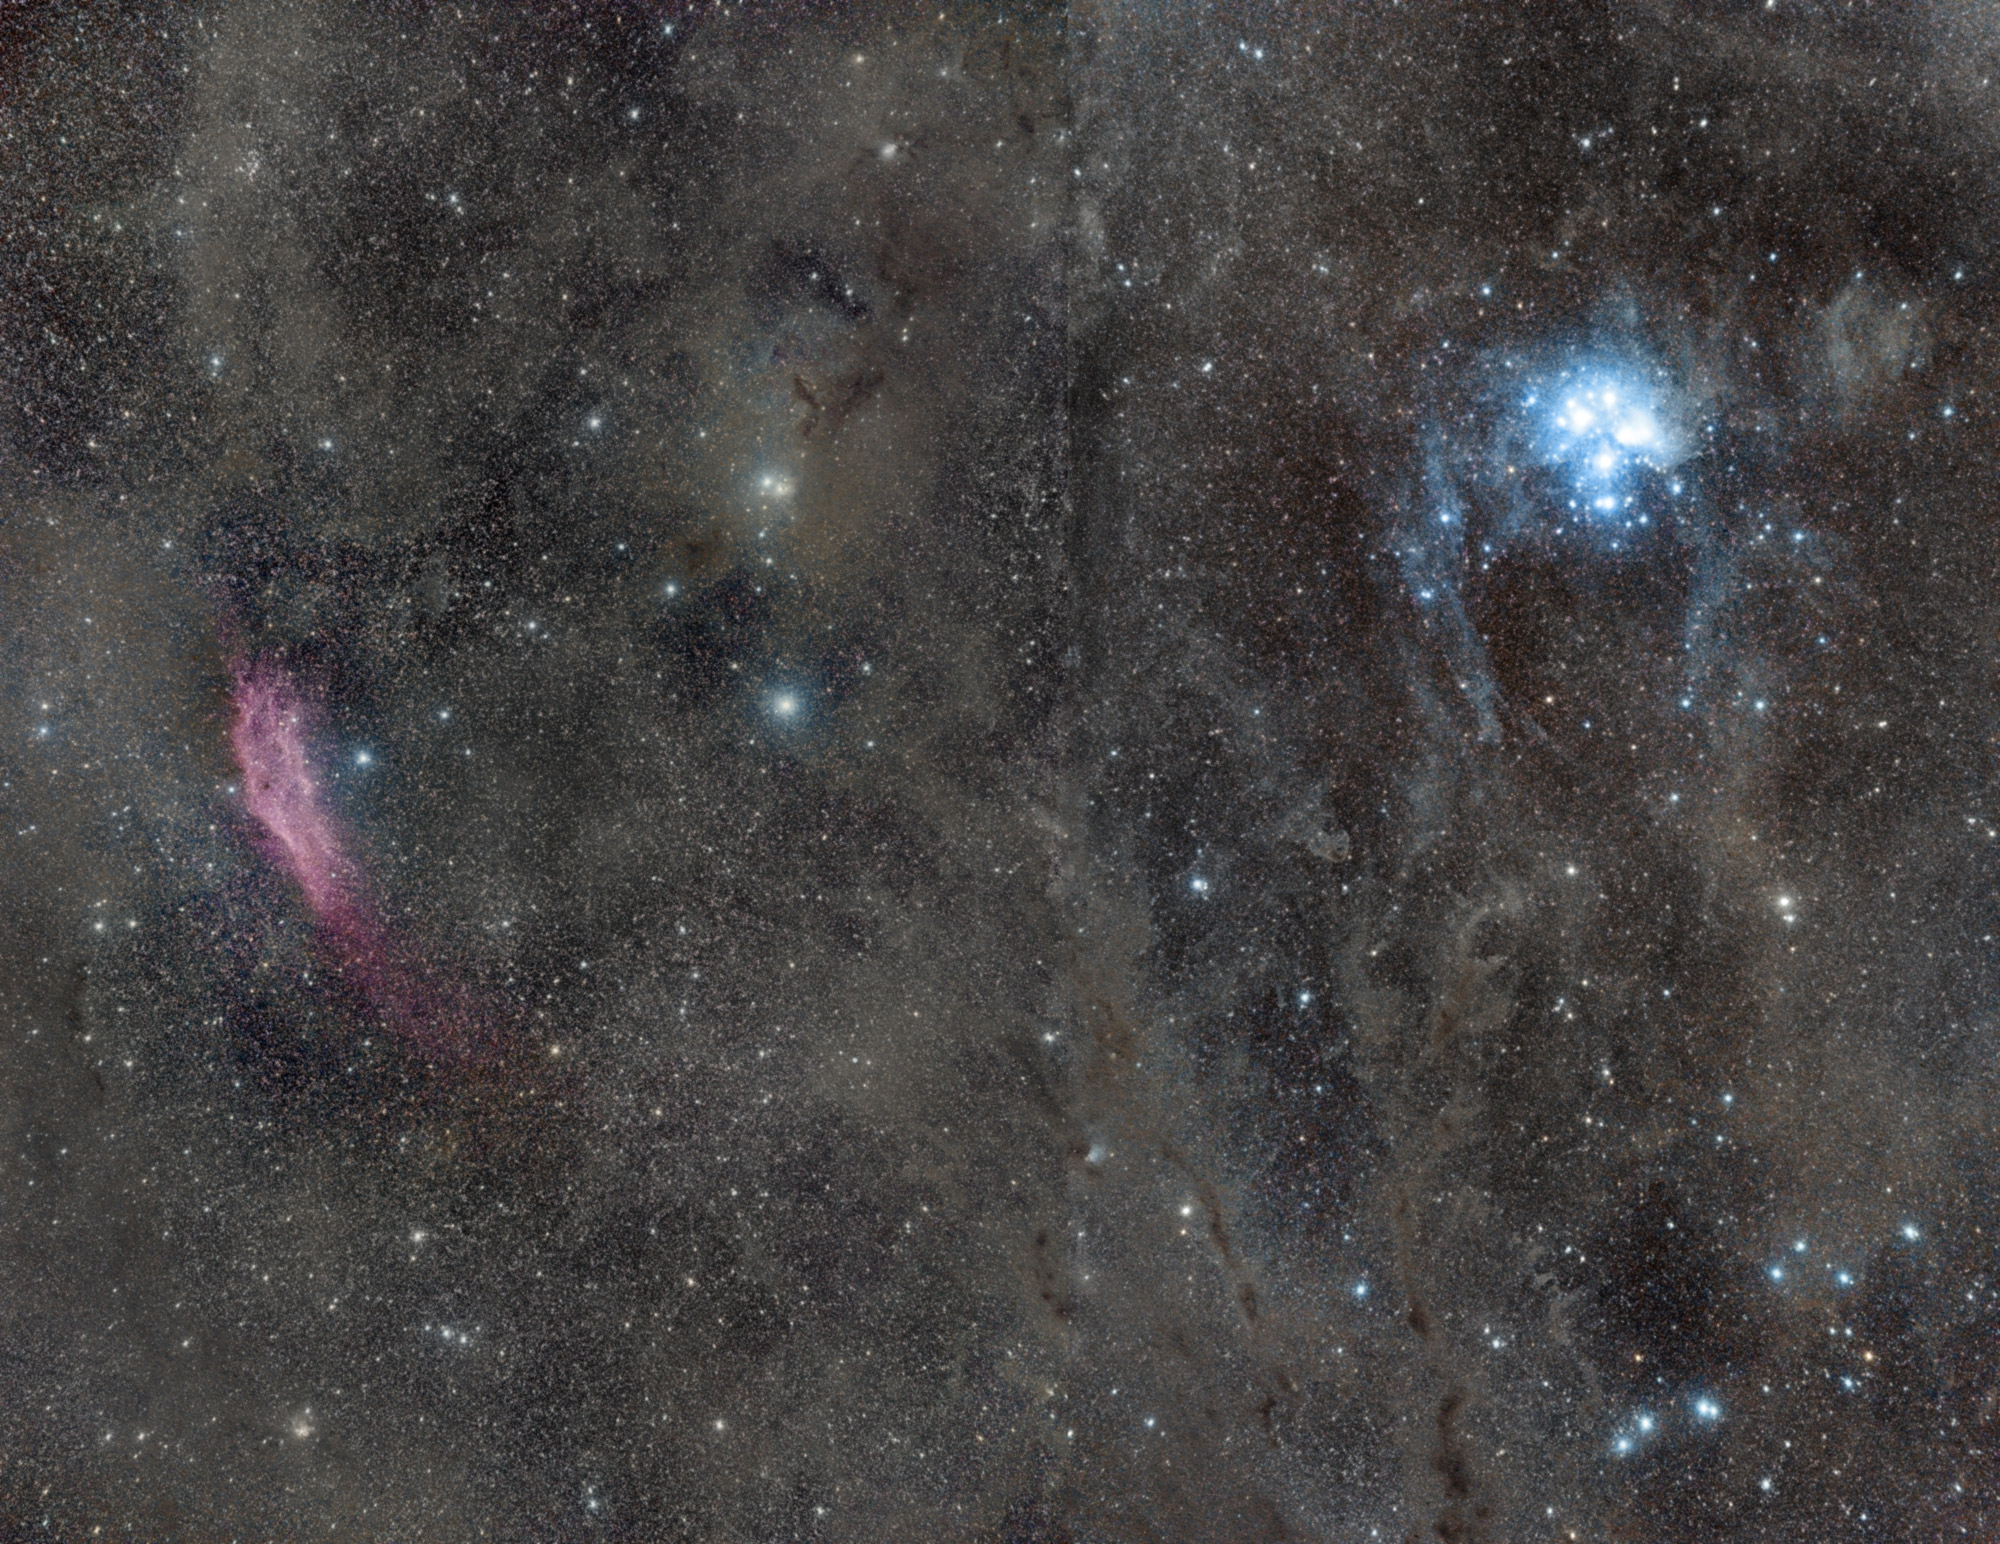 Mosaic from the California Nebula to the Seven Sisters